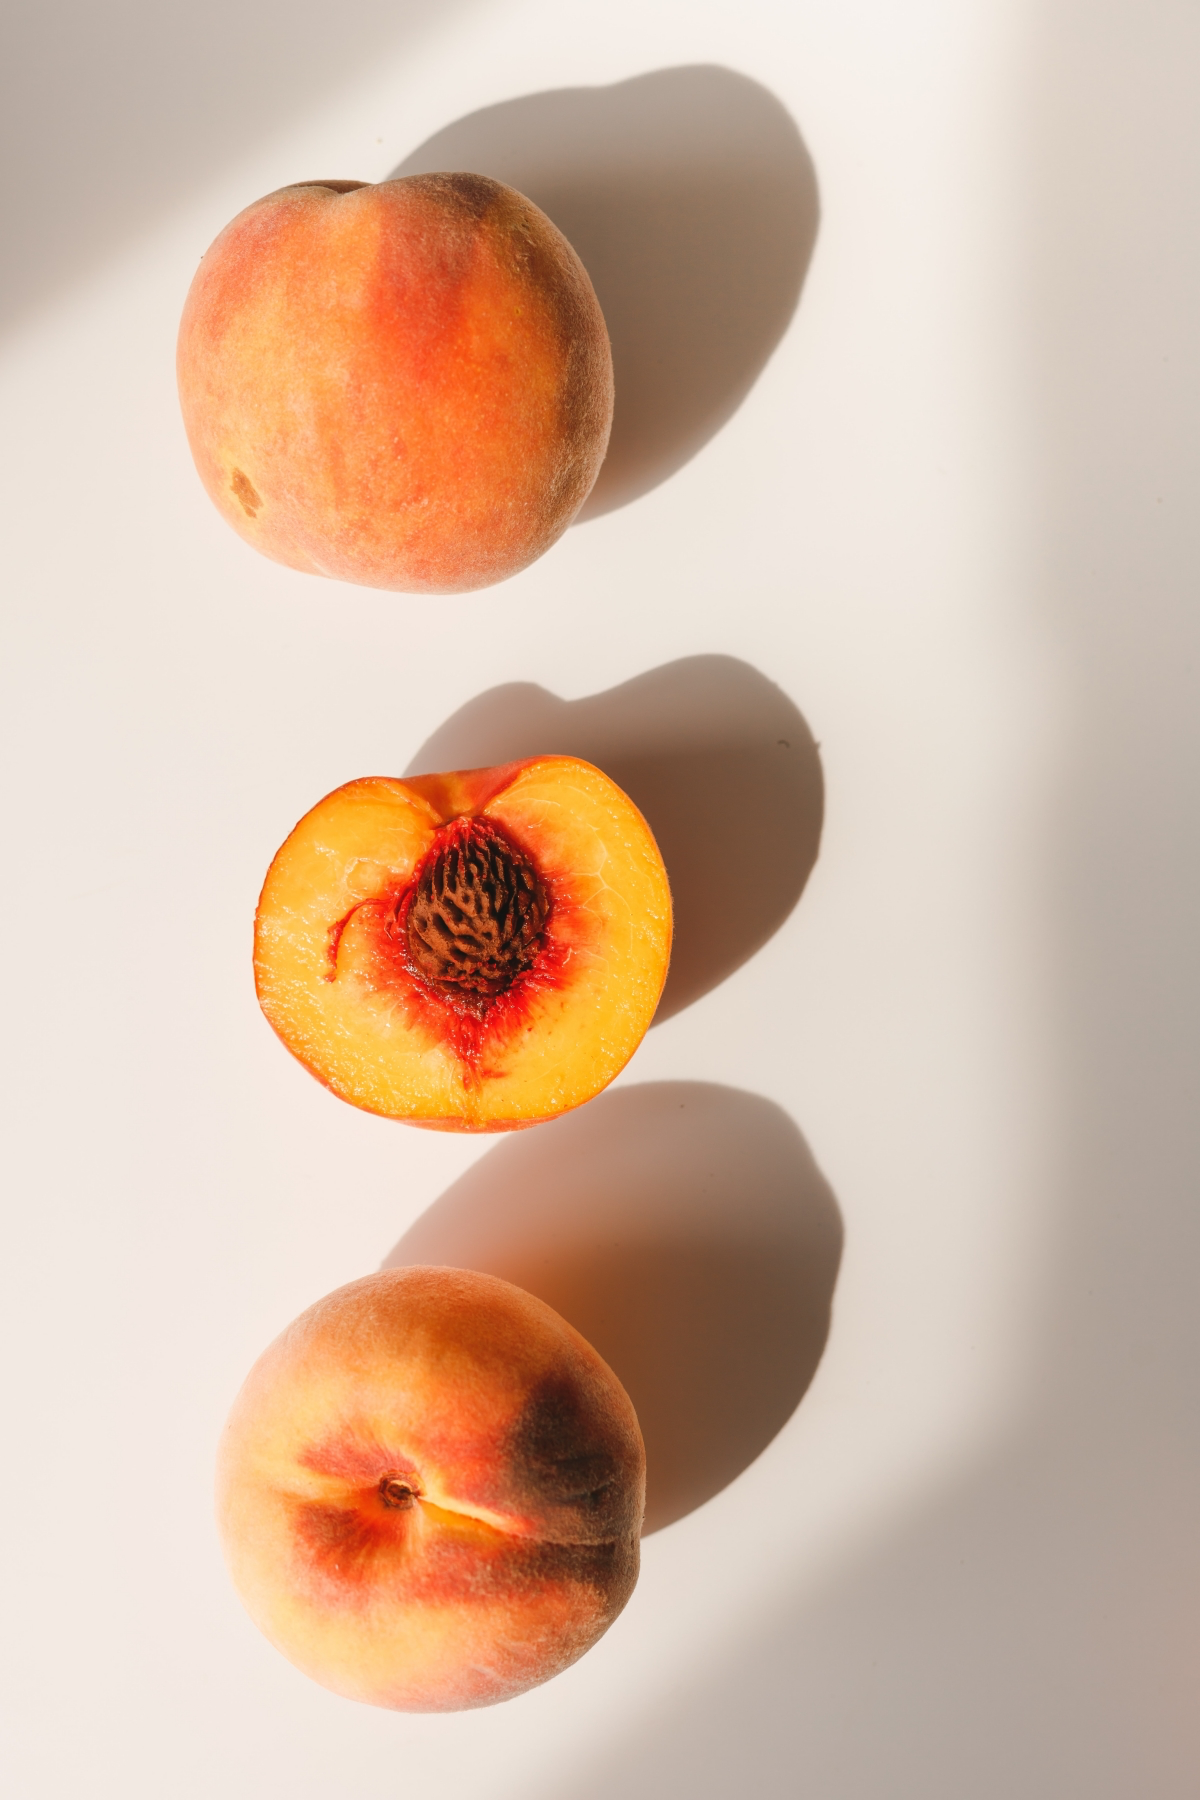 are nectarines and apricots the same